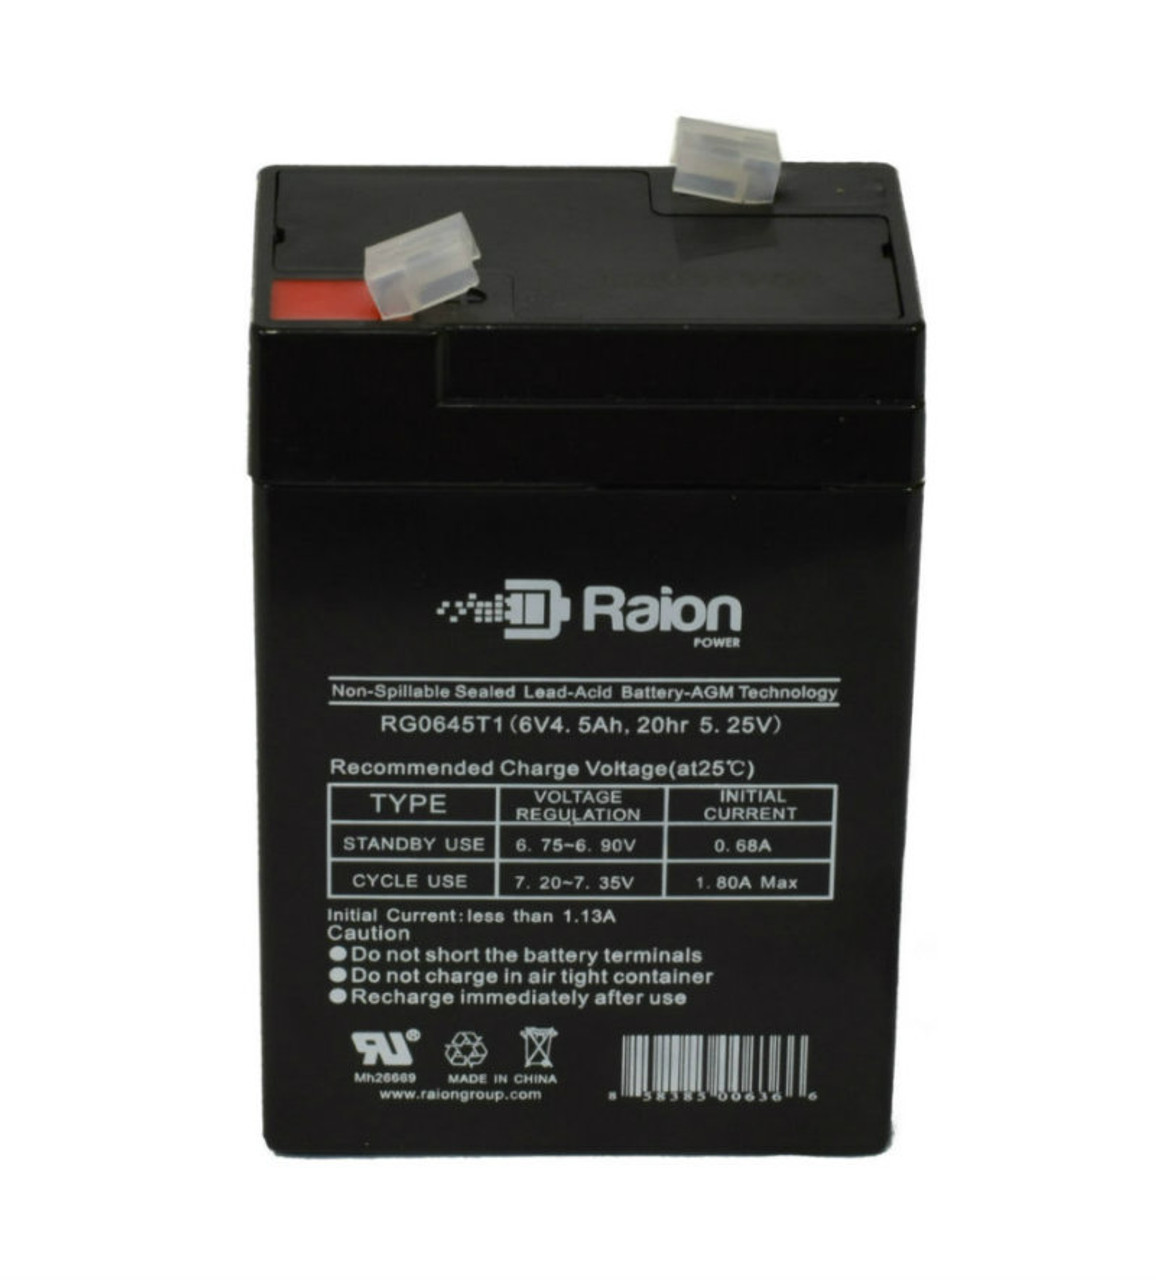 Raion Power RG0645T1 Replacement Battery Cartridge for Dorcy Spotlight 41-1056